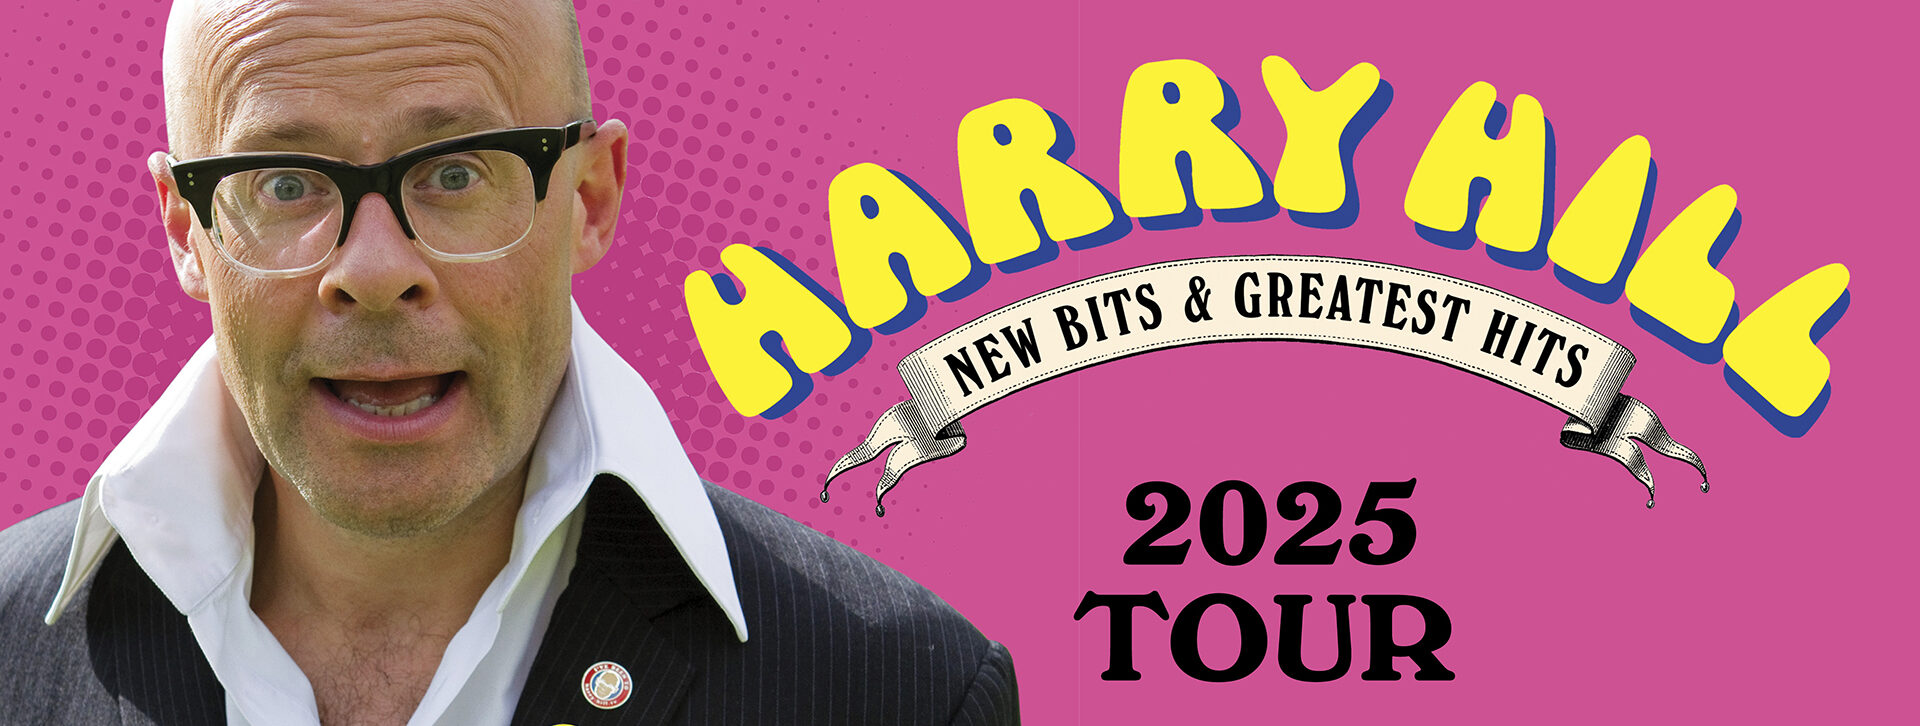 HARRY HILL: New Bits &#038; Greatest Hits